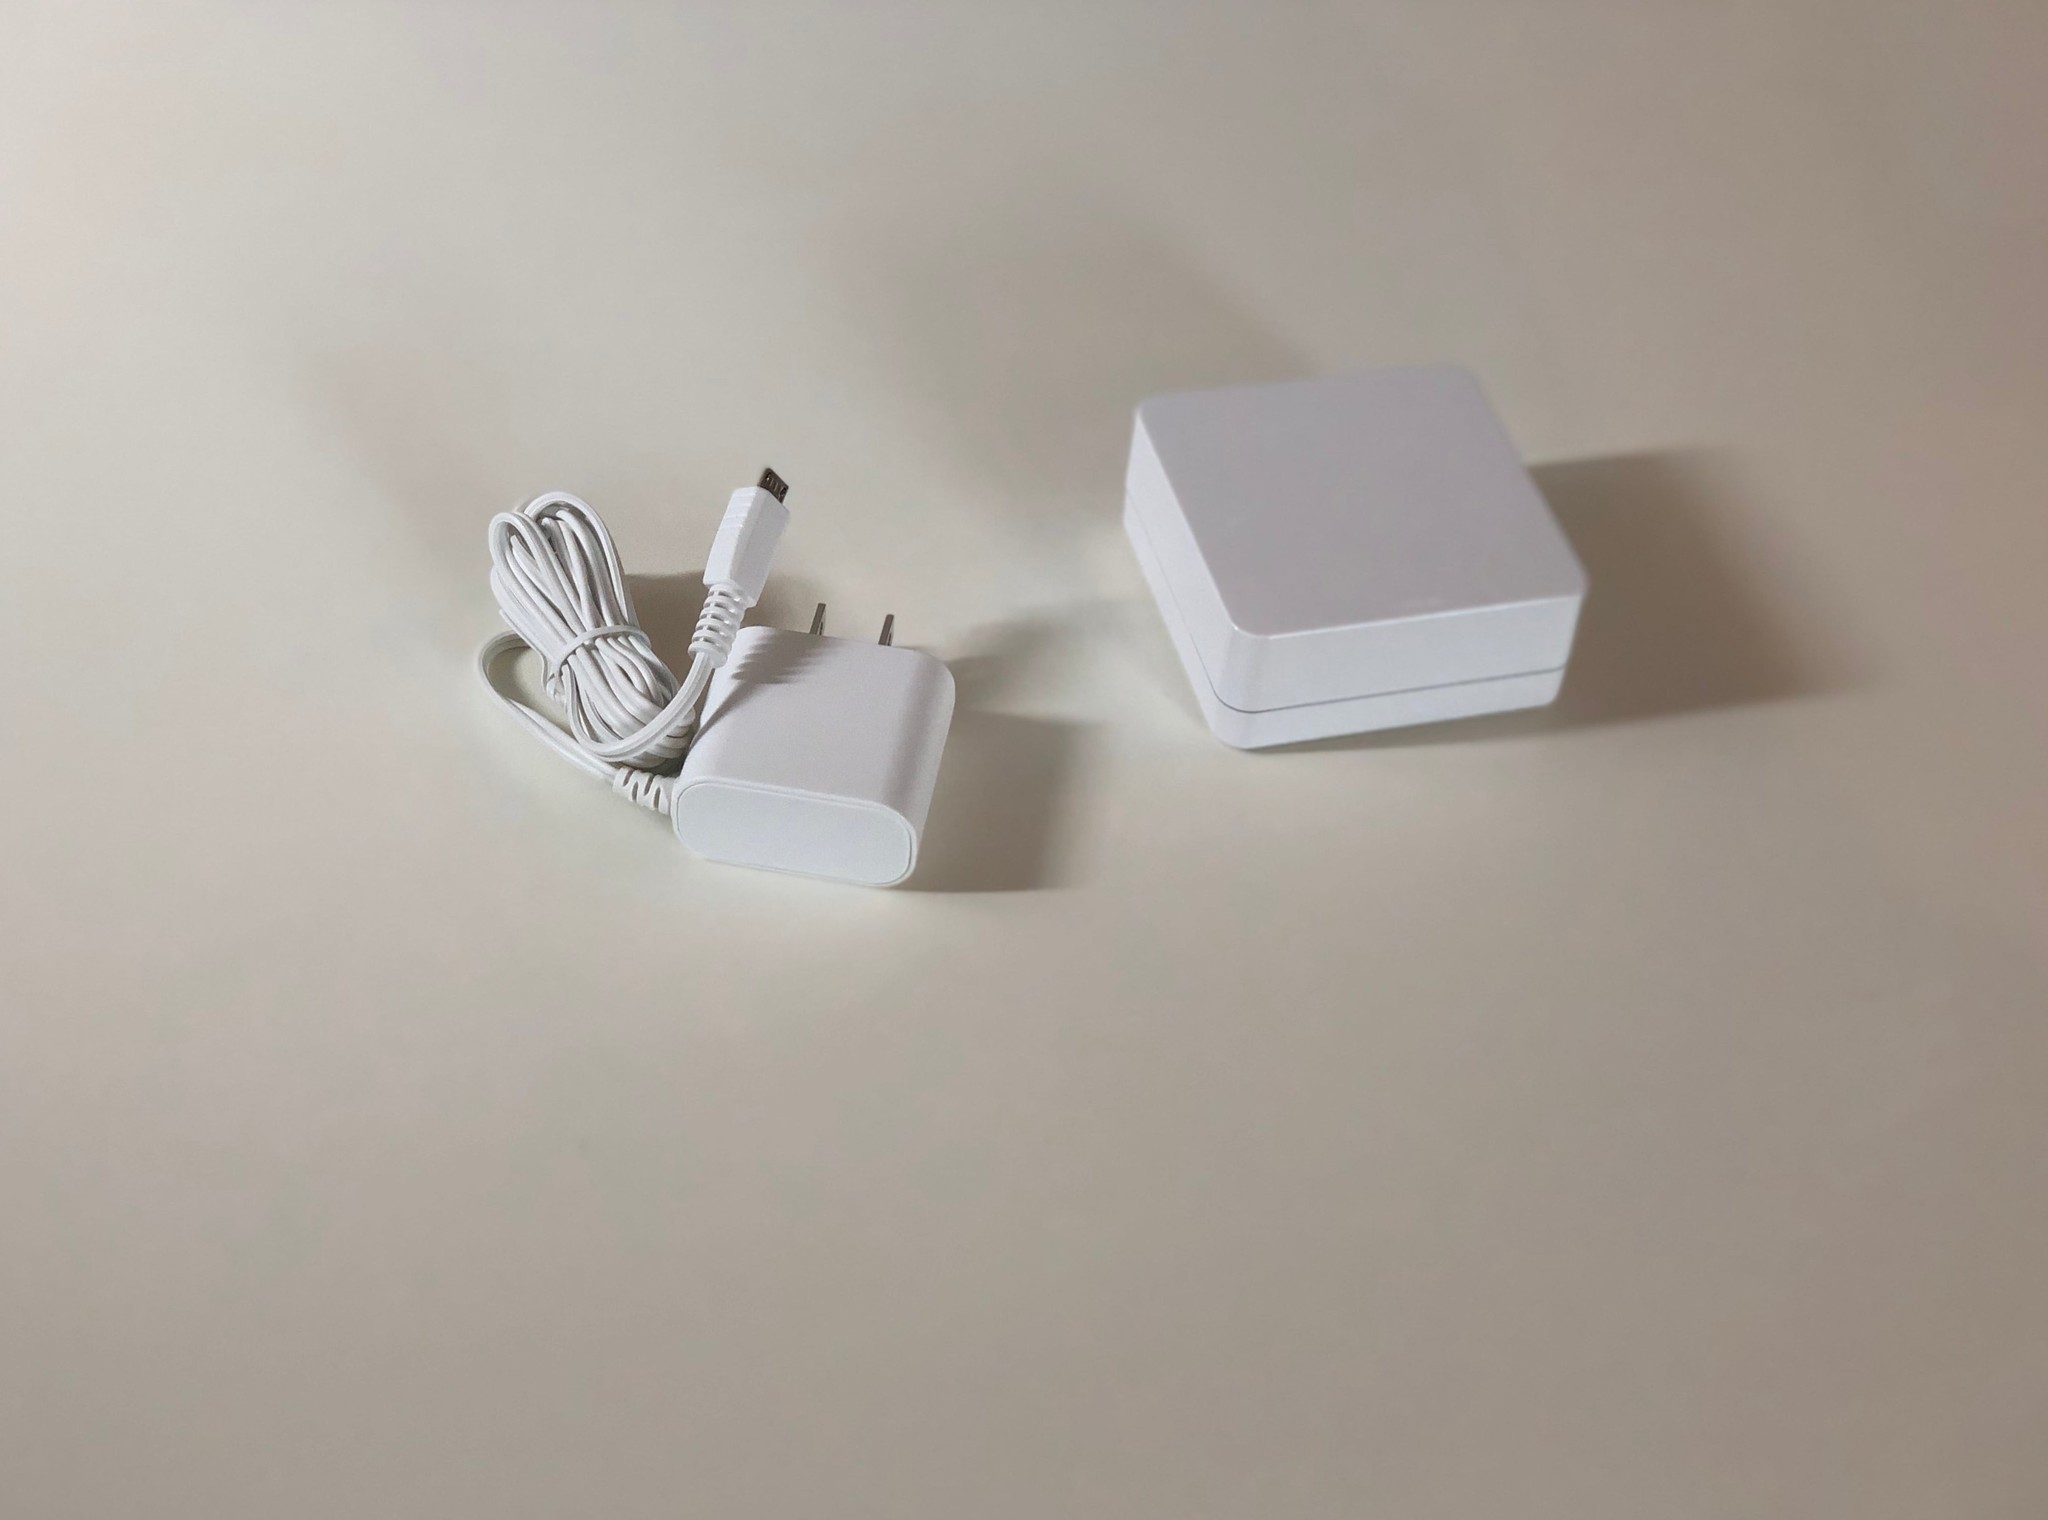 Lutron Caseta Wireless Smart Repeater and power adapter